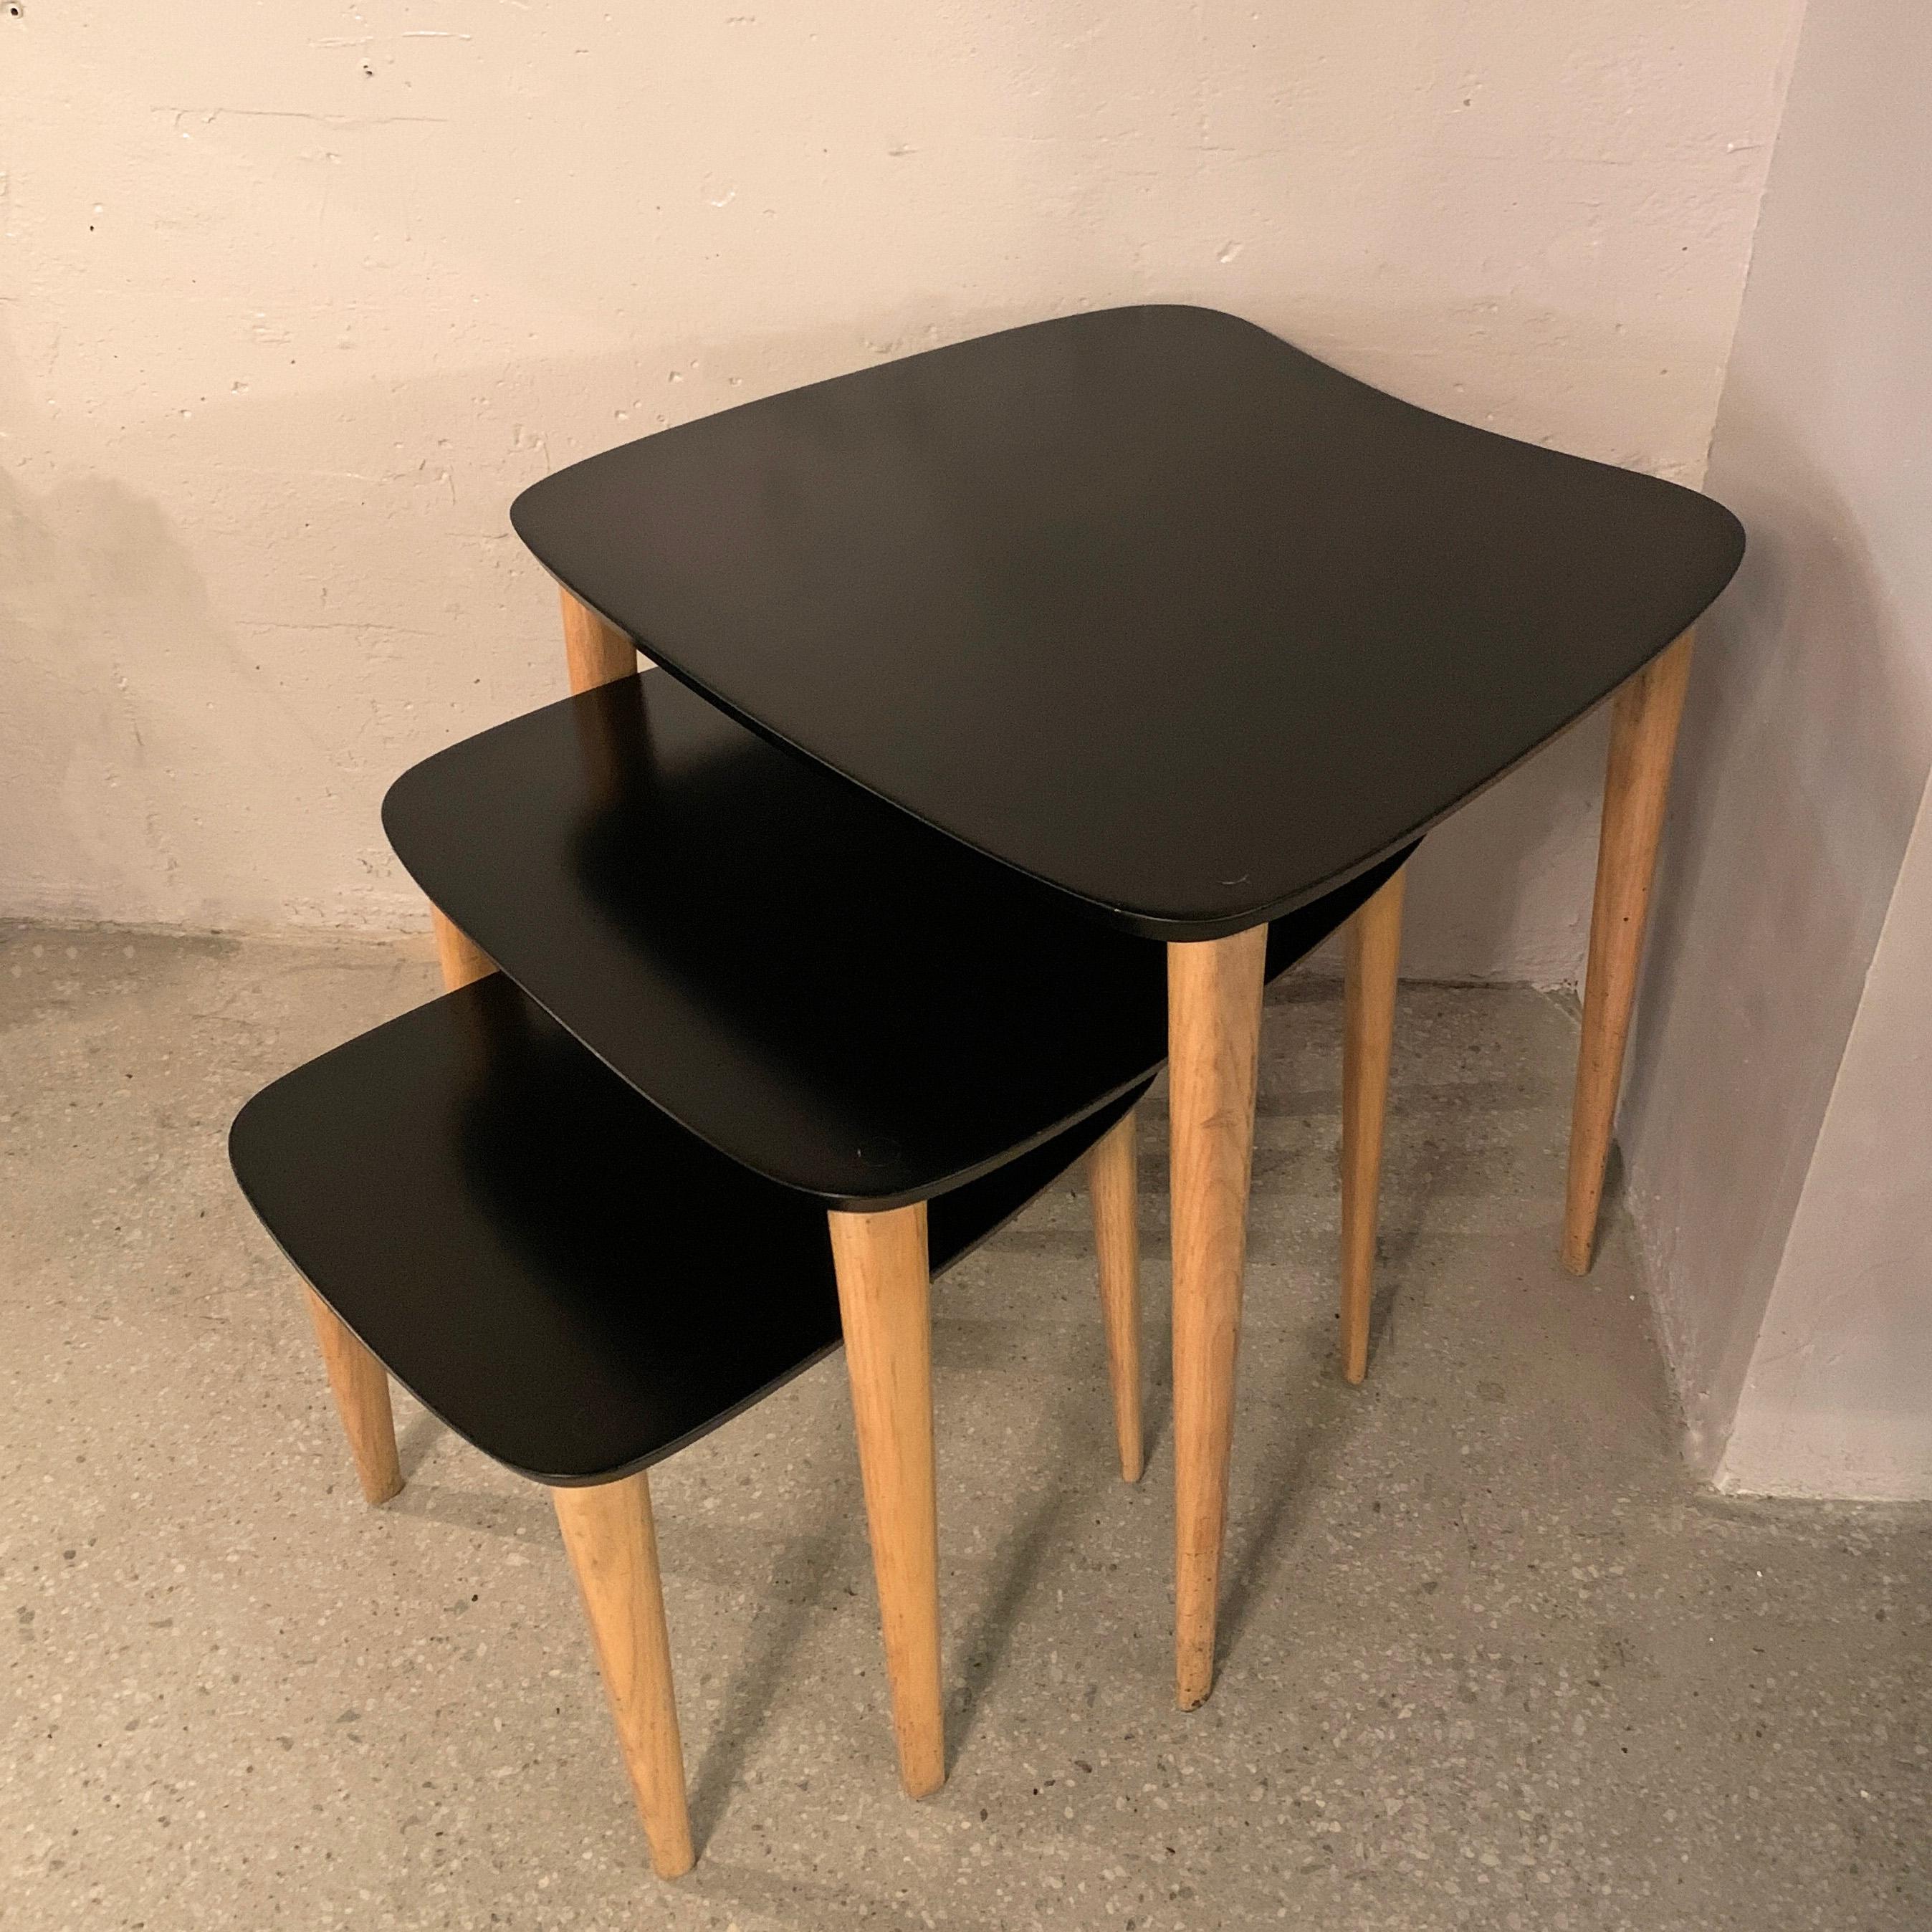 Trio of Mid-Century Modern, nesting tables feature biomorphic, black lacquered tops with contrasting, tapered natural legs. The middle table measures: 19 inches width x 19.5 inches depth x 19.25 inches height and the bottom table measures: 14.5